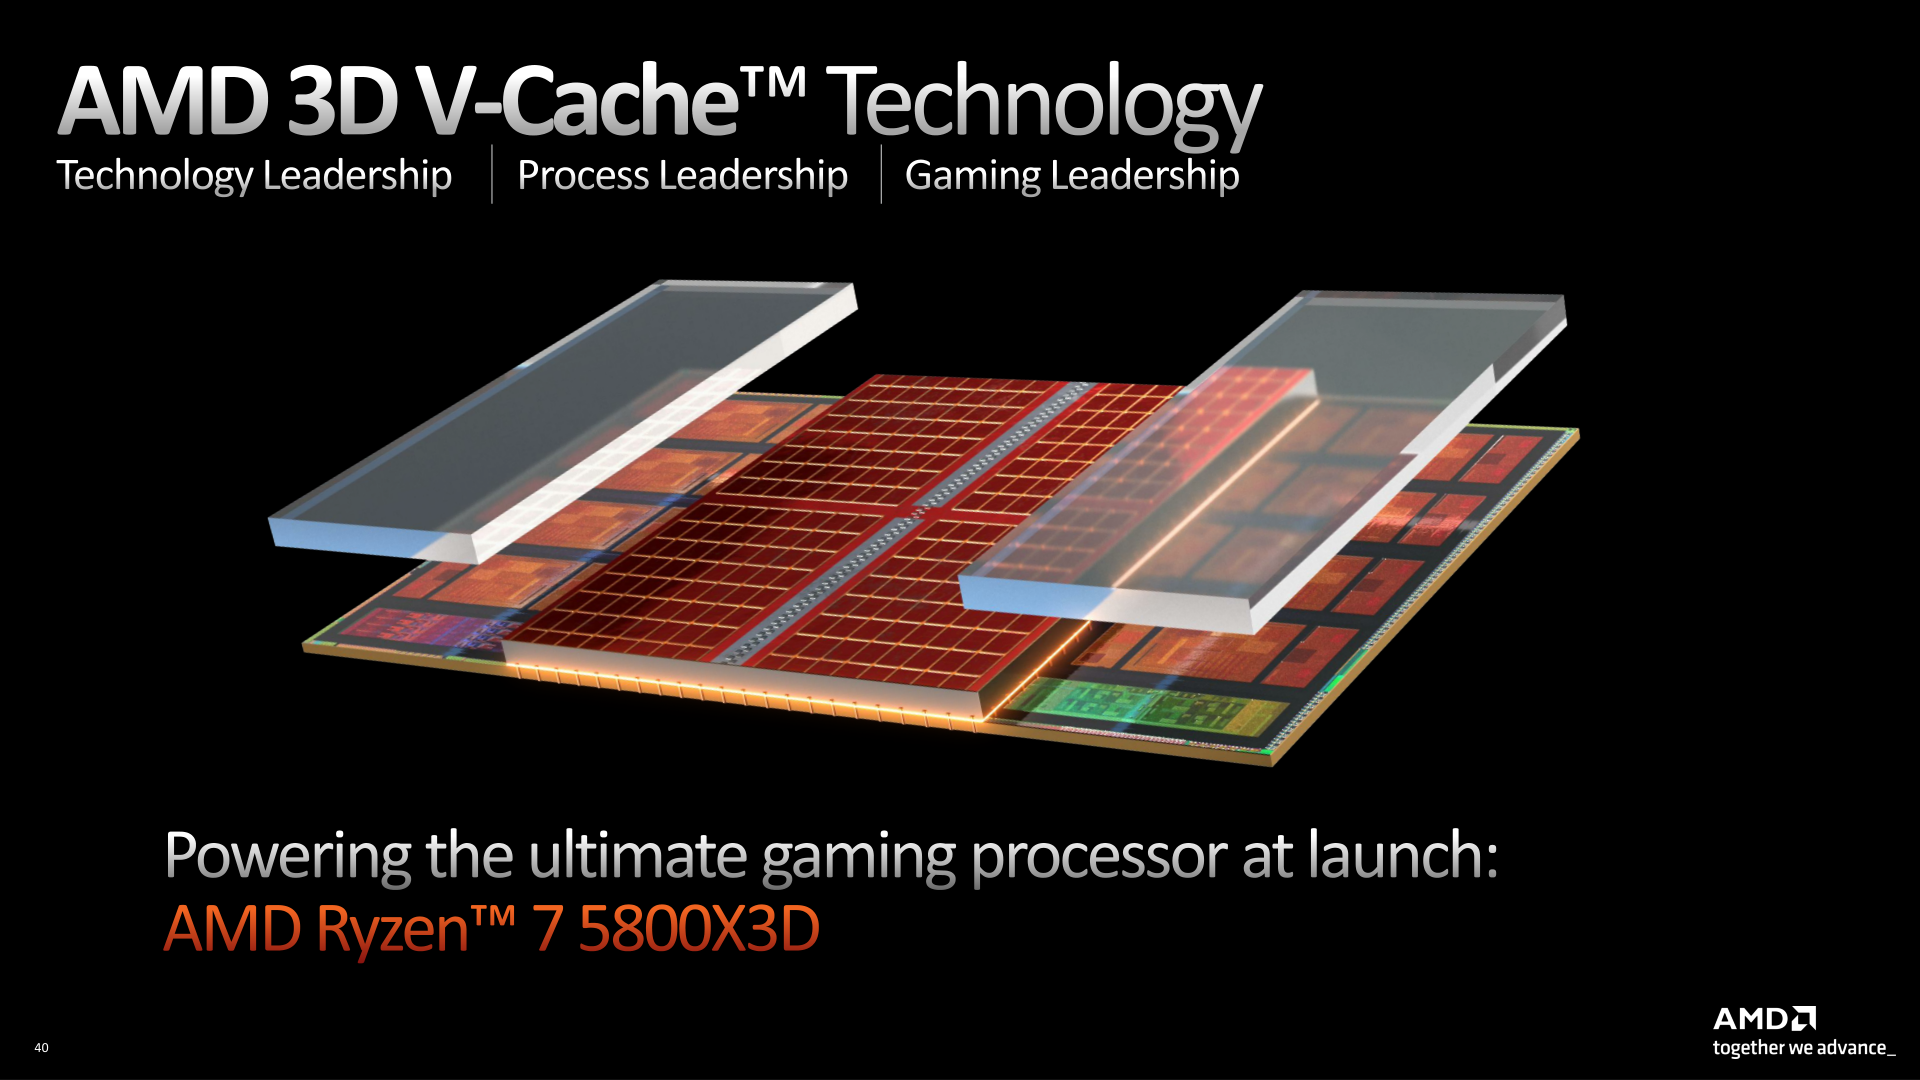 AMD's Ryzen 7000X3D Chips Get Release Dates: February 28th and